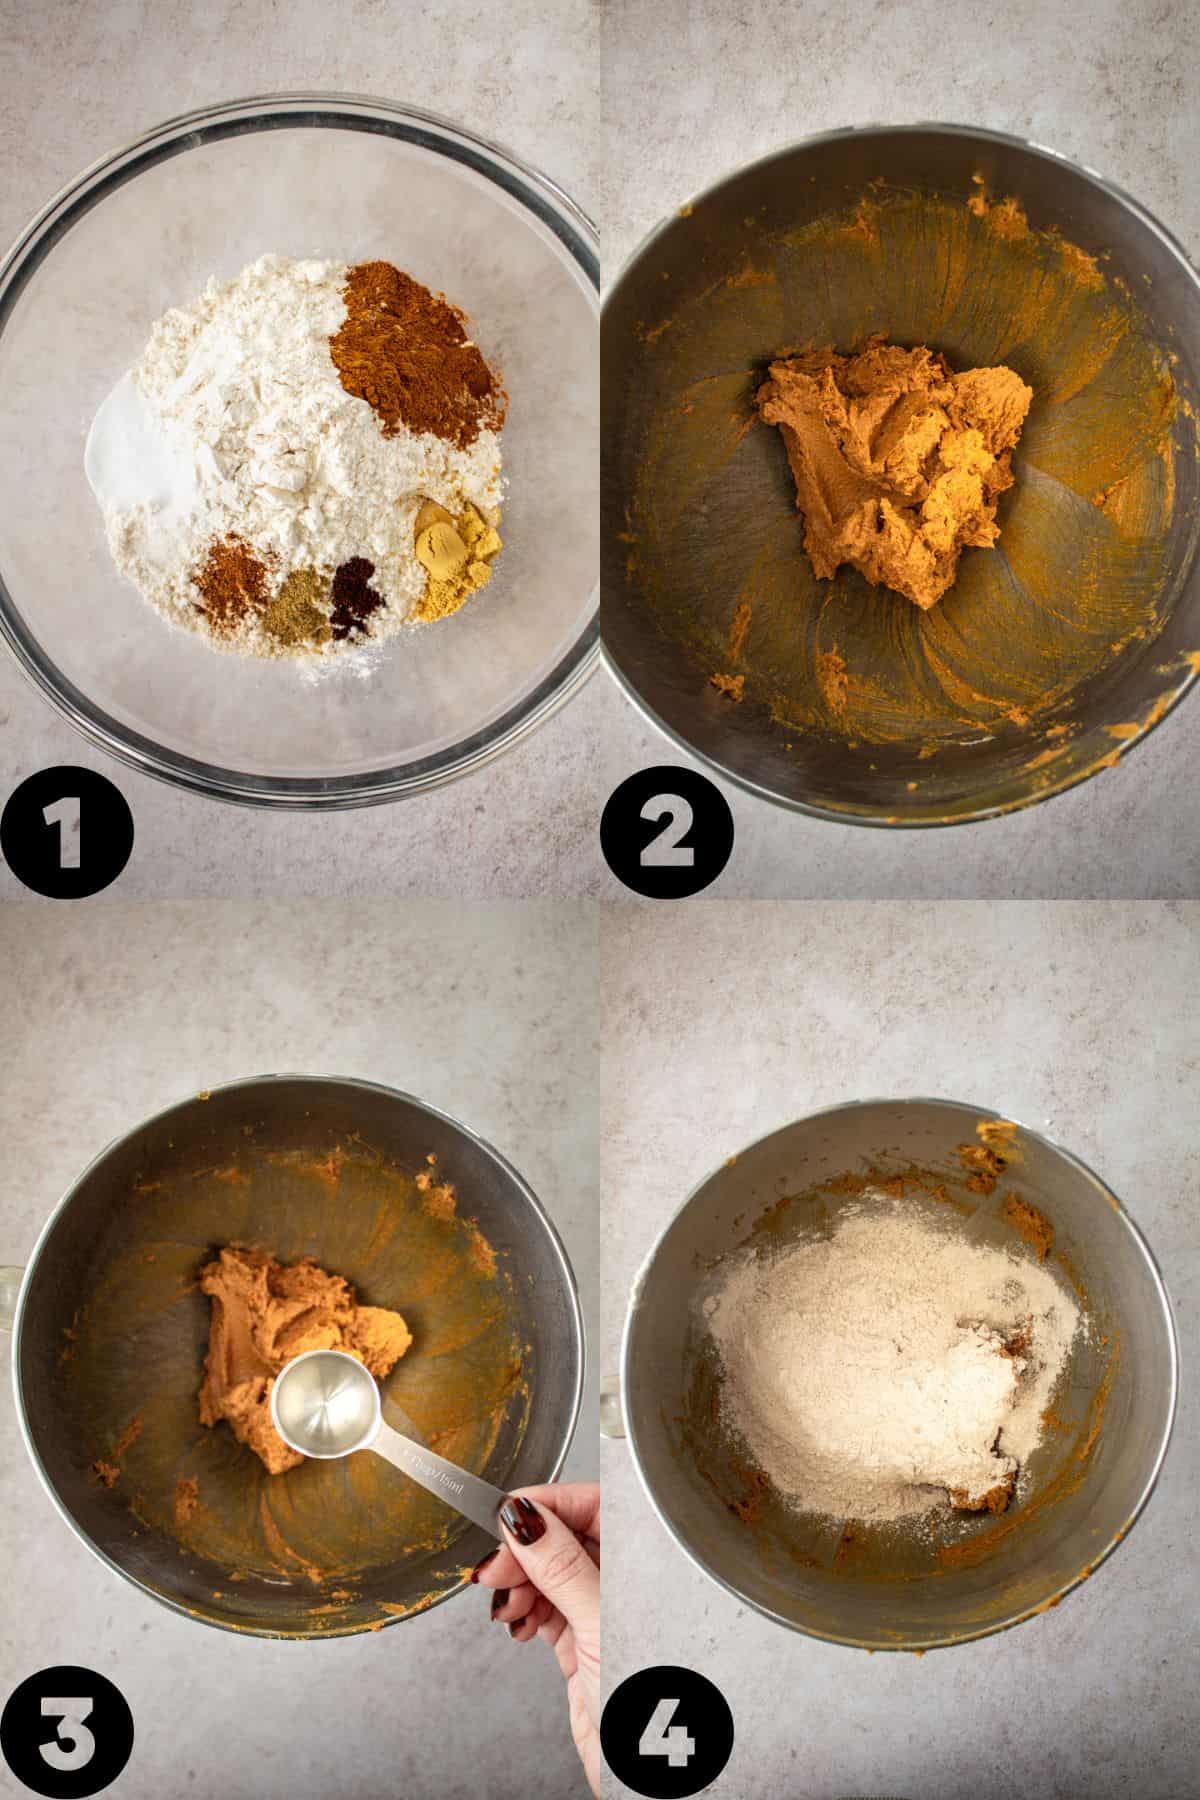 Flour, spices, salt and baking soda in a bowl, butter and brown sugar beaten together, adding hot water, adding flour mixture to egg and sugar mixture